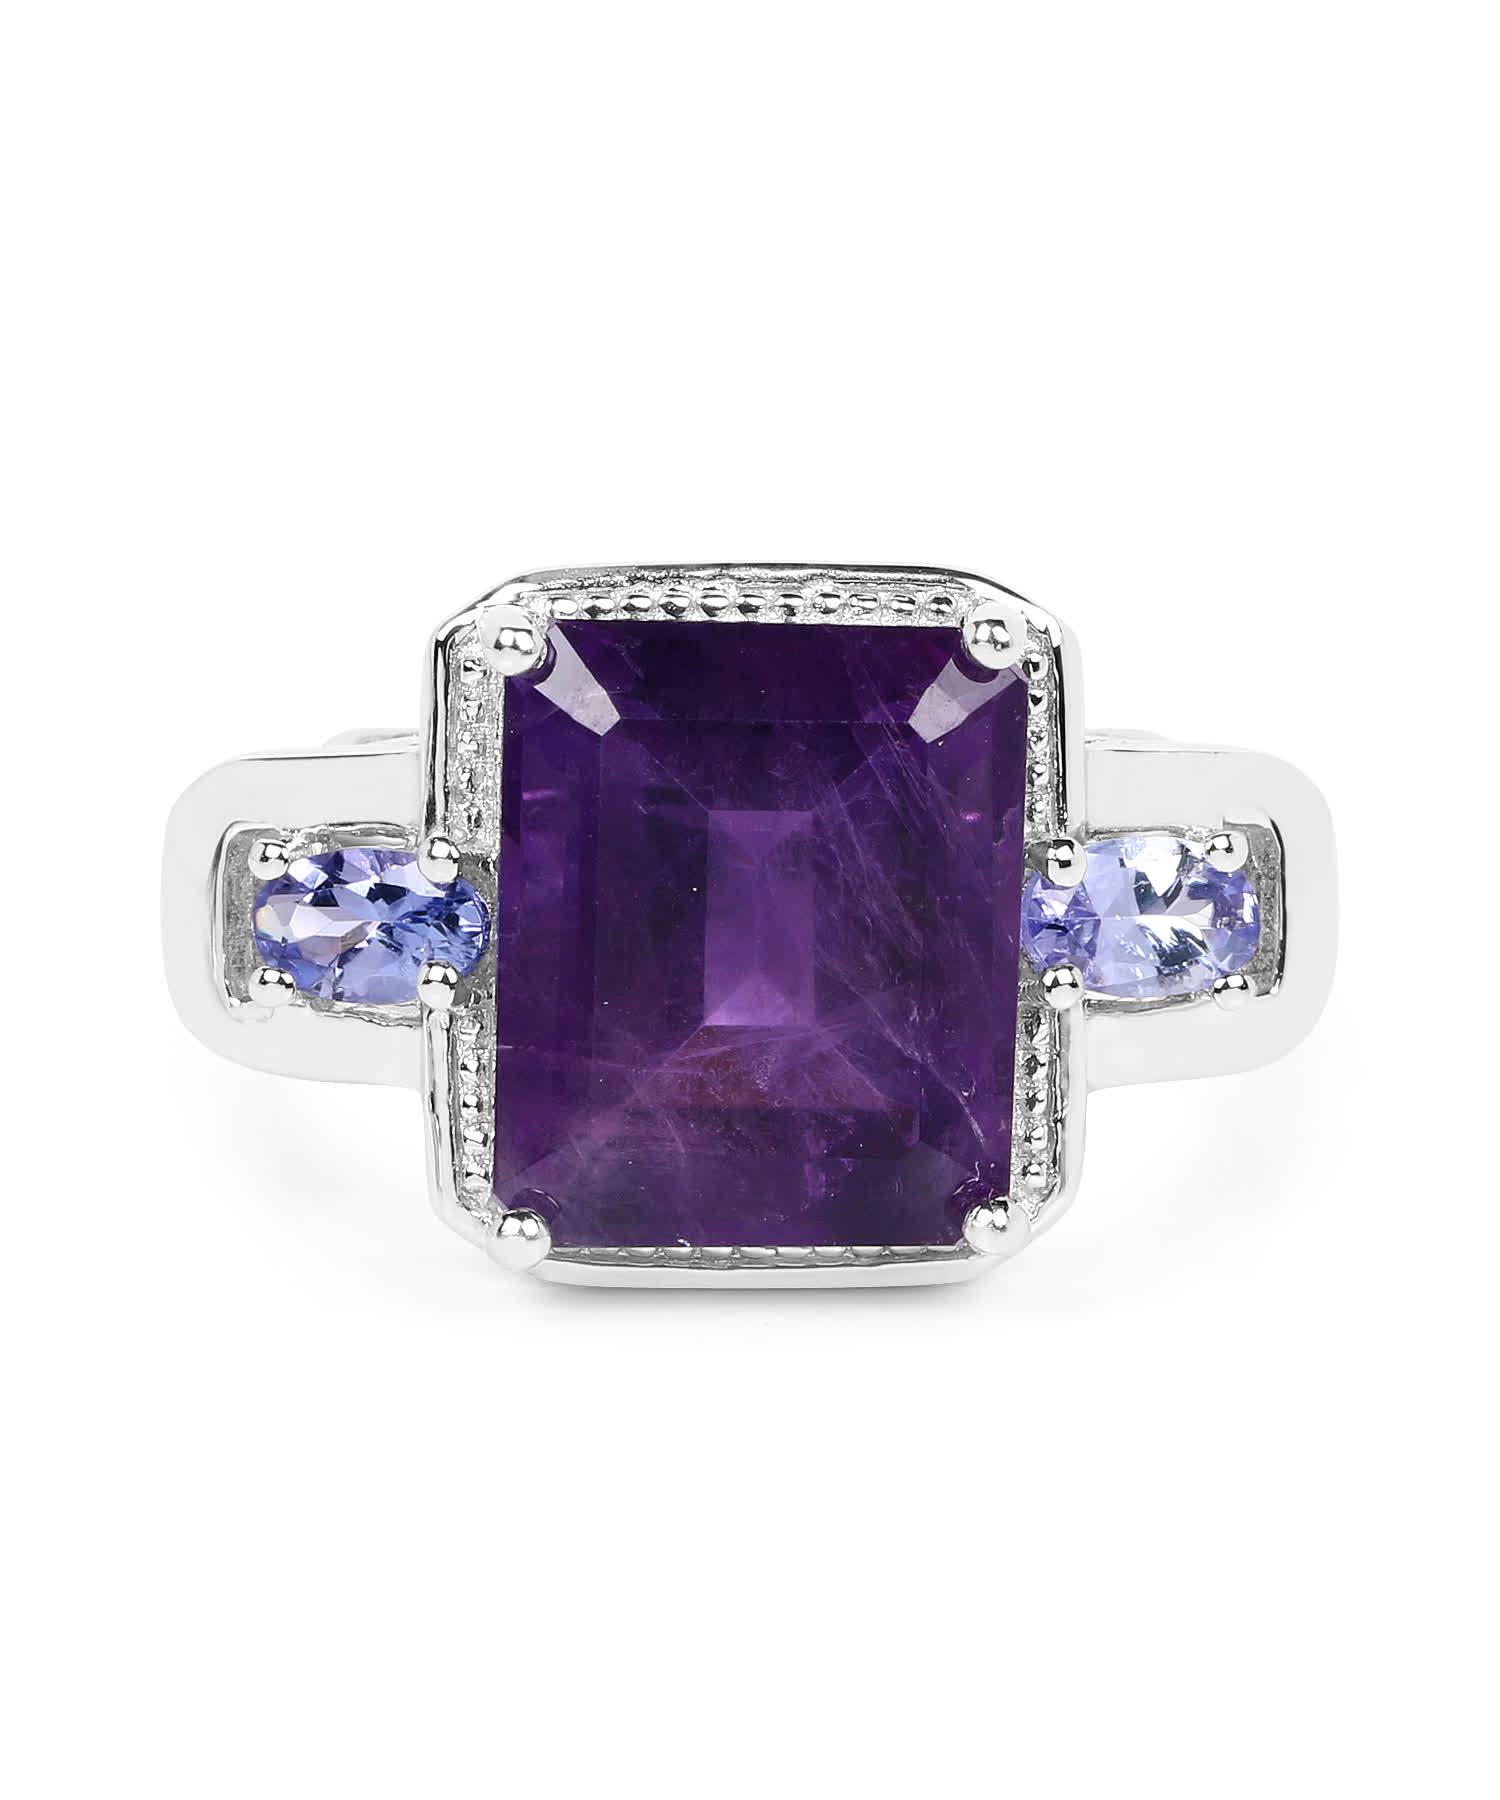 5.15ctw Natural Amethyst and Tanzanite Rhodium Plated 925 Sterling Silver Fashion Cocktail Ring View 3